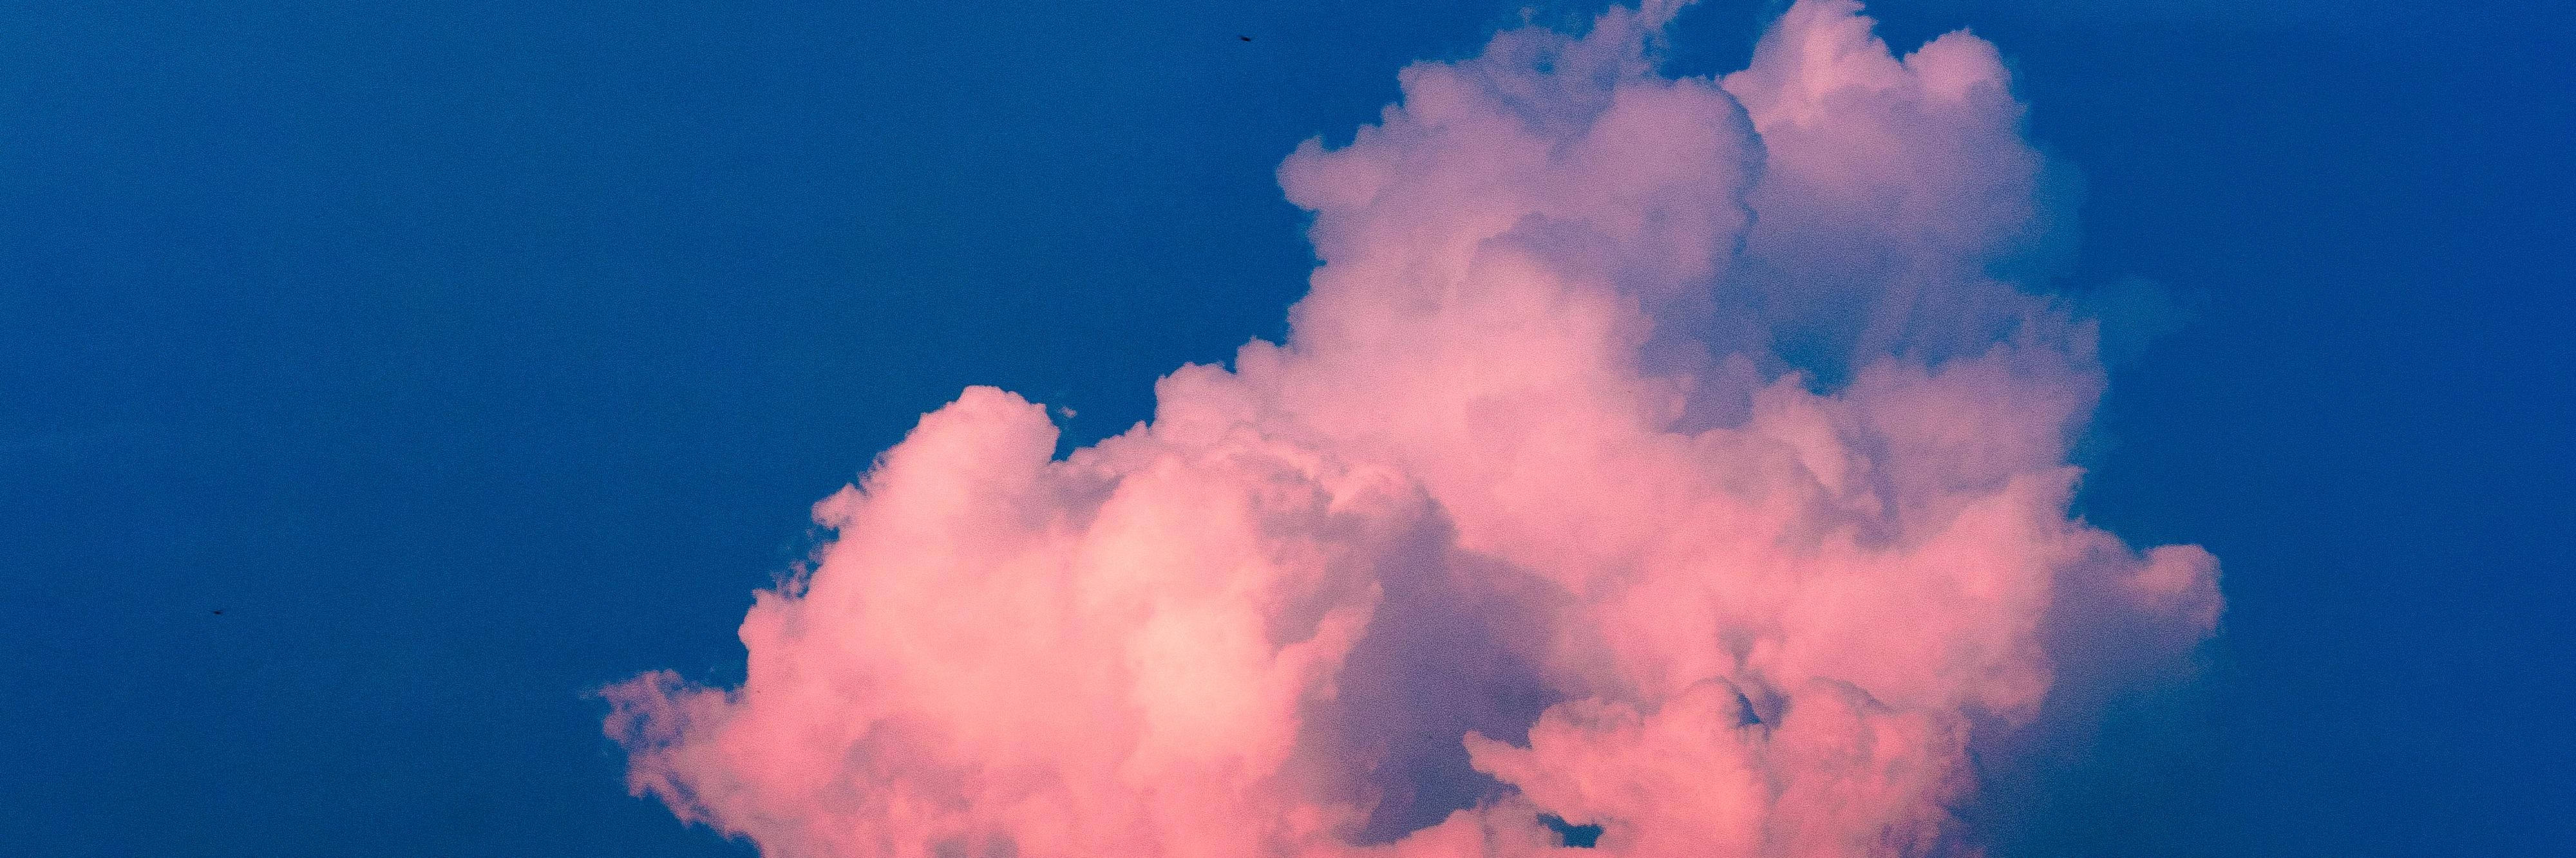 Thick Vintage Aesthetic Cloud Background